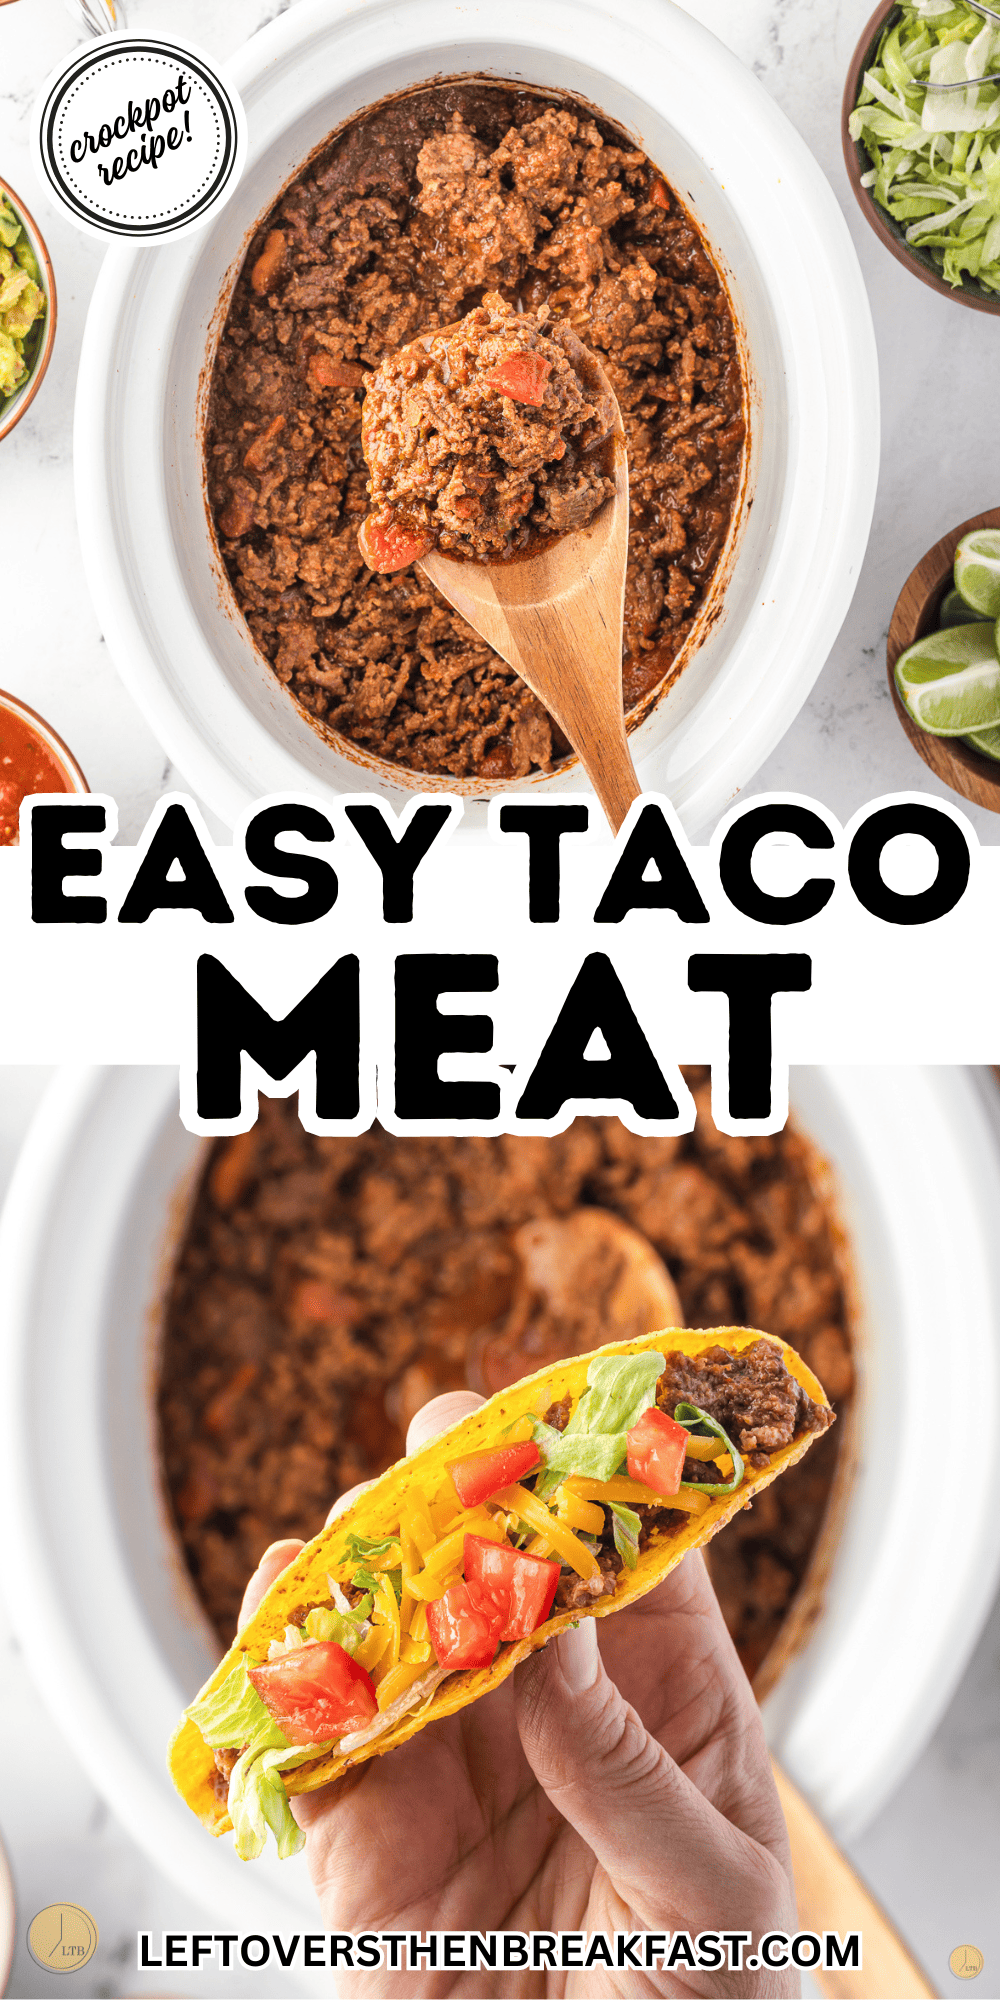 crockpot taco meat with tacos for an easy weeknight meal.